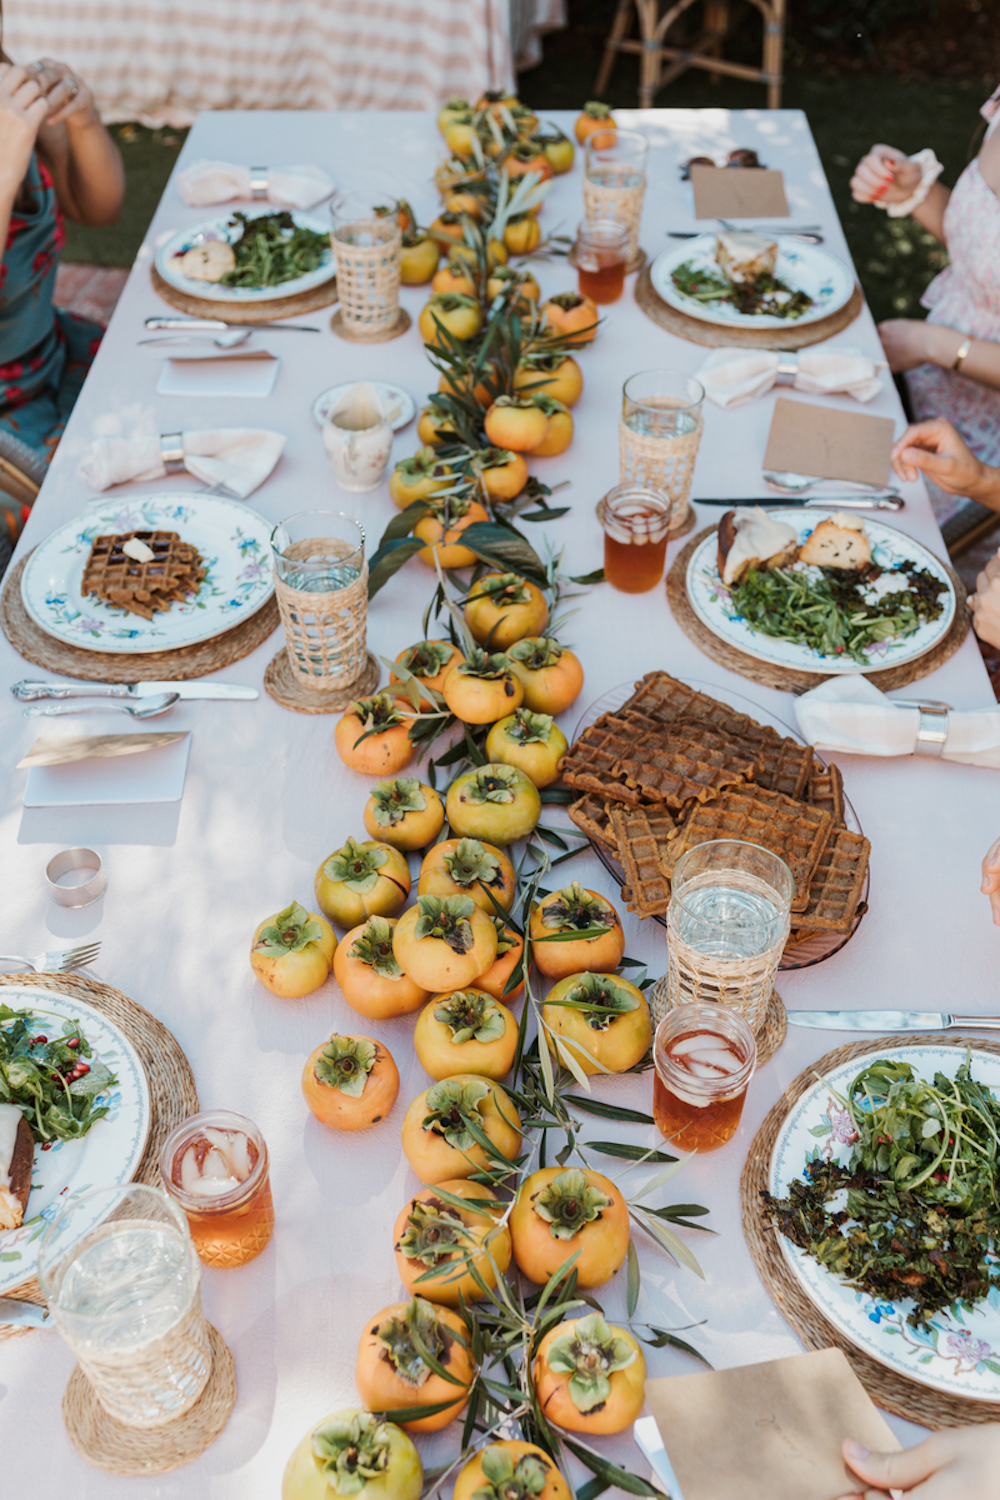 Outdoor long dining table setting with orange persimmons running down the center of the table.